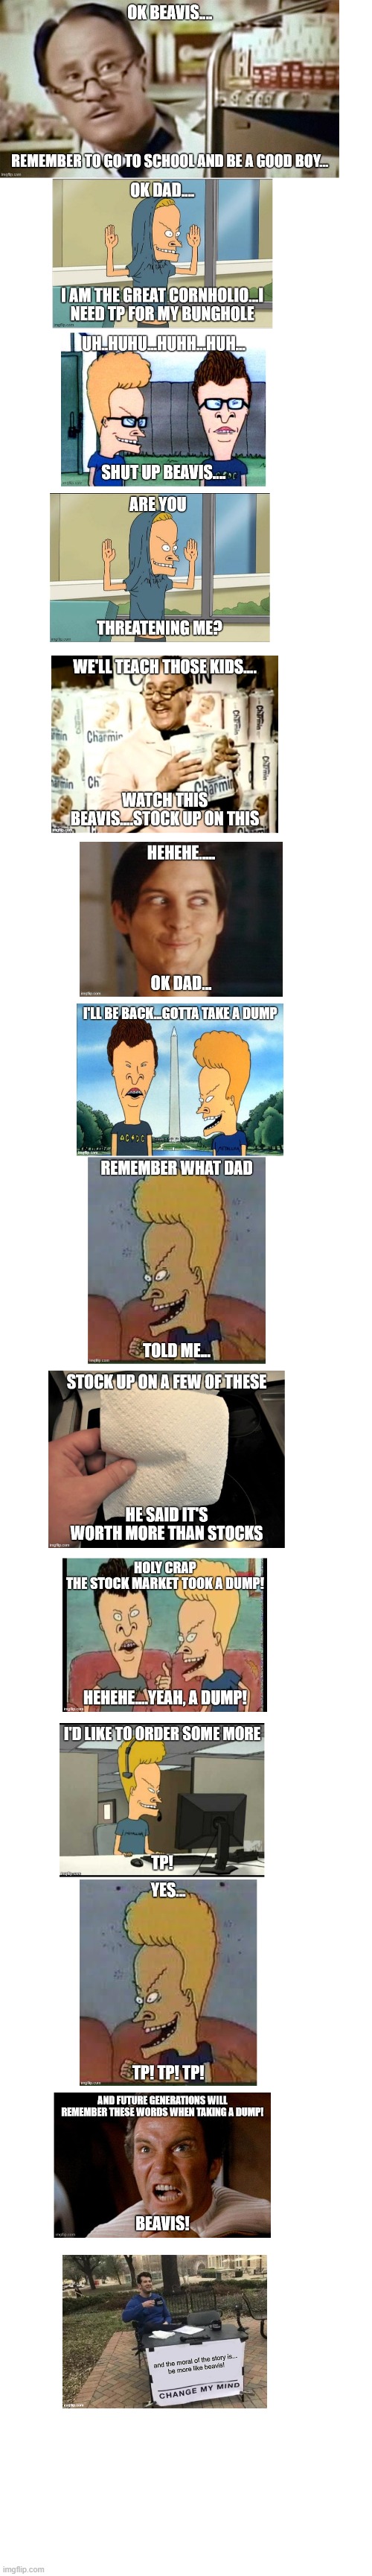 This week on "Leave it to Beavis" | image tagged in beavis and butthead,no more toilet paper,corona virus,leave it to beaver | made w/ Imgflip meme maker